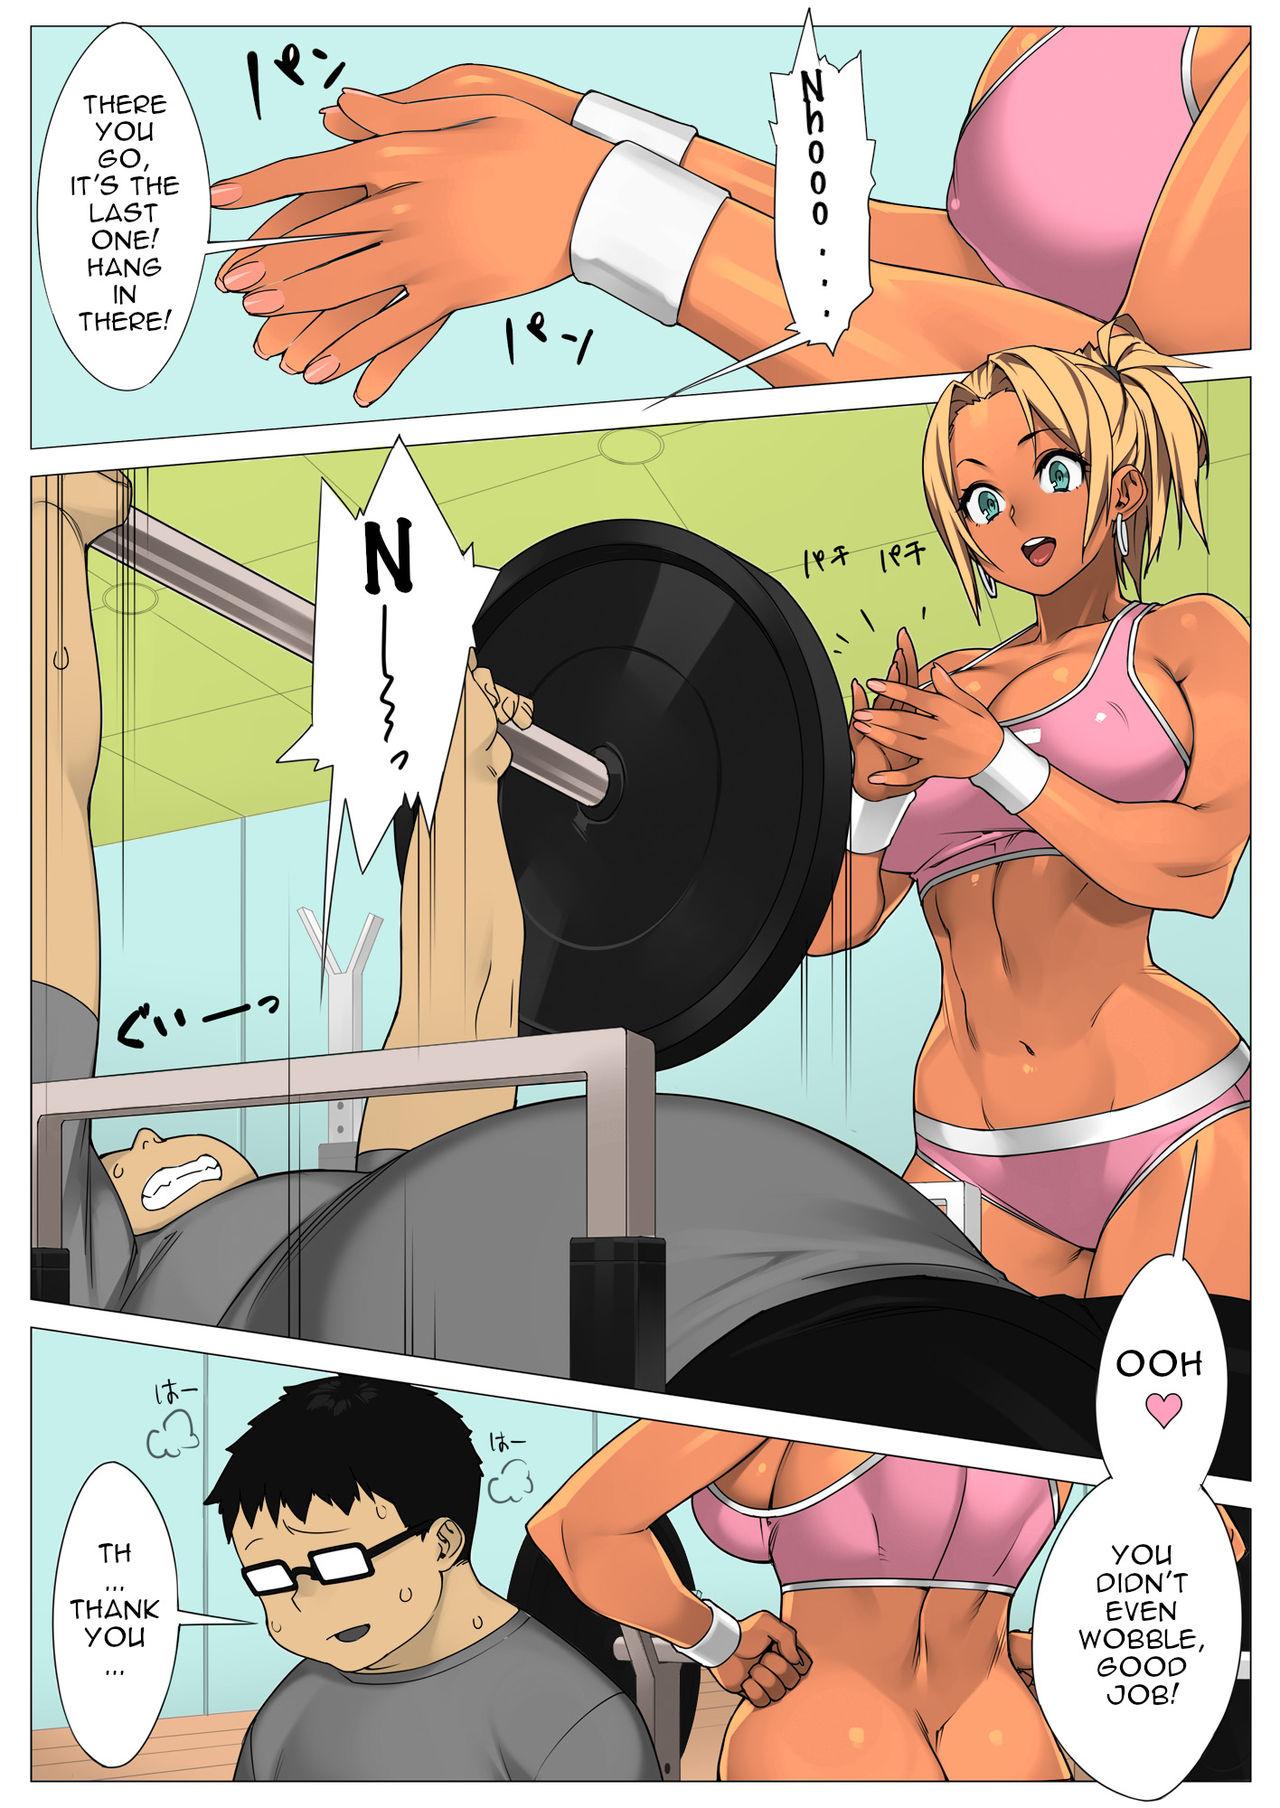 Private TRAINING DAY - Original Jerkoff - Page 2